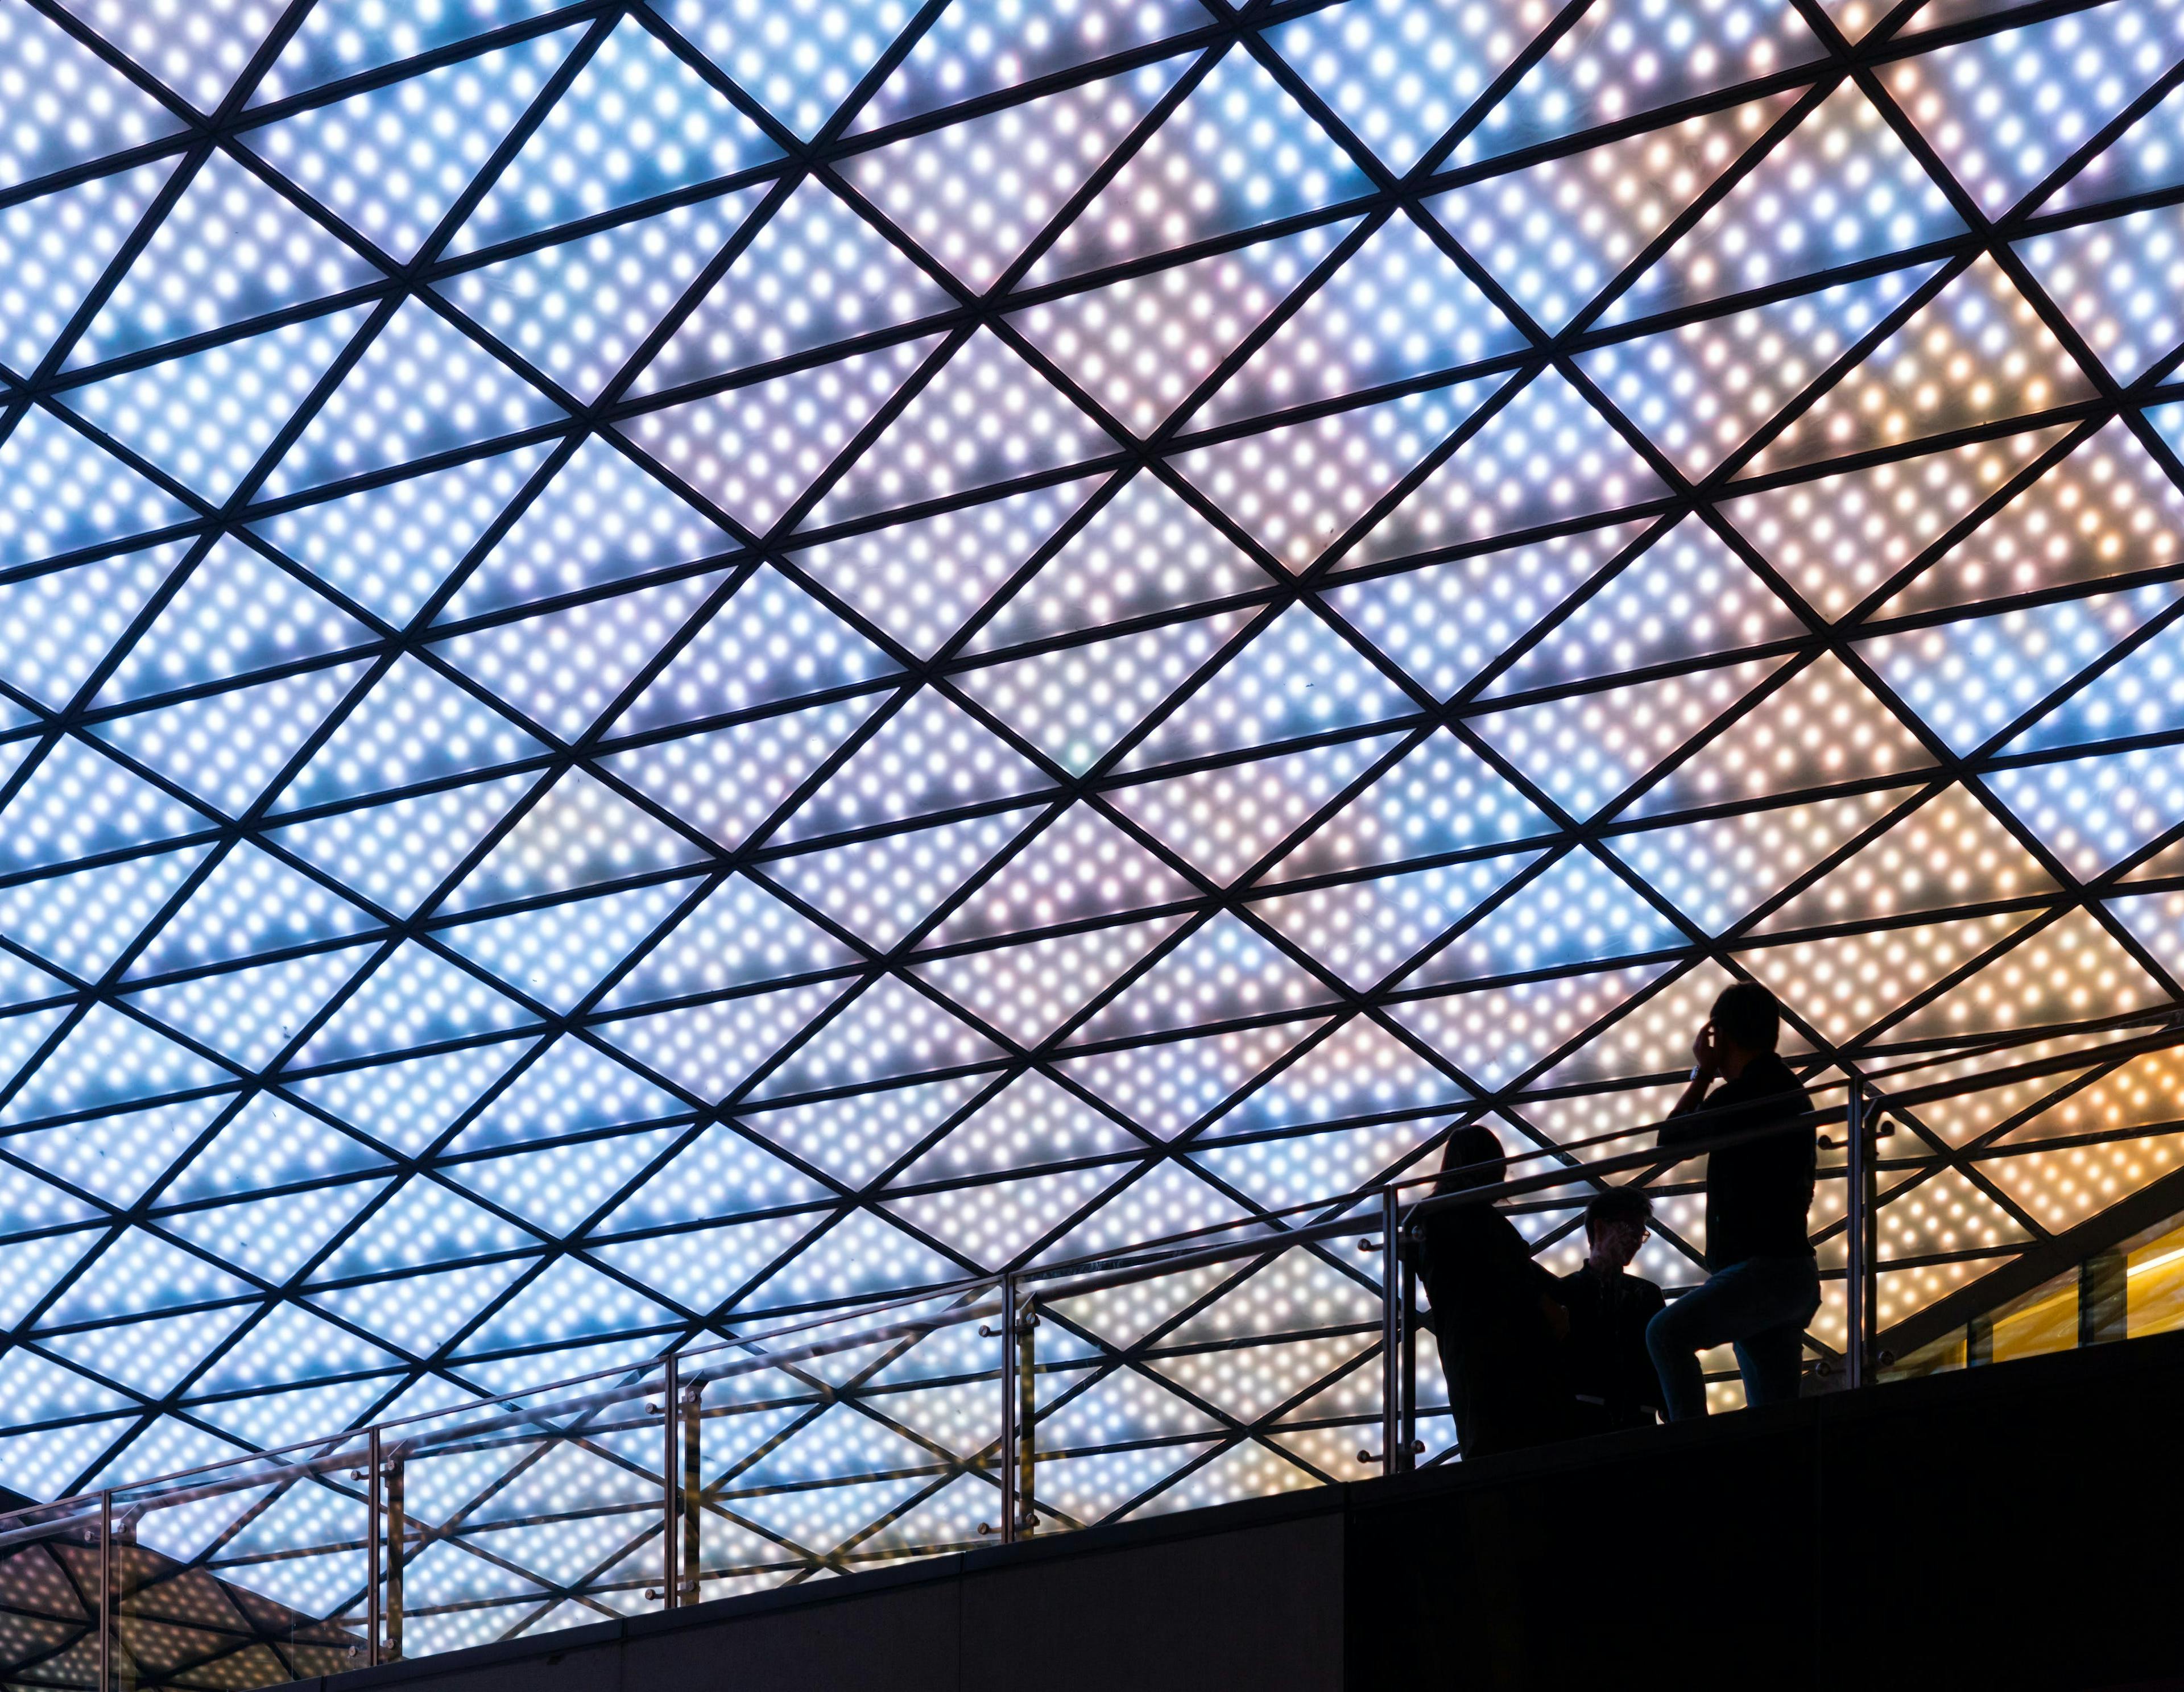 silhouettes under a lit ceiling